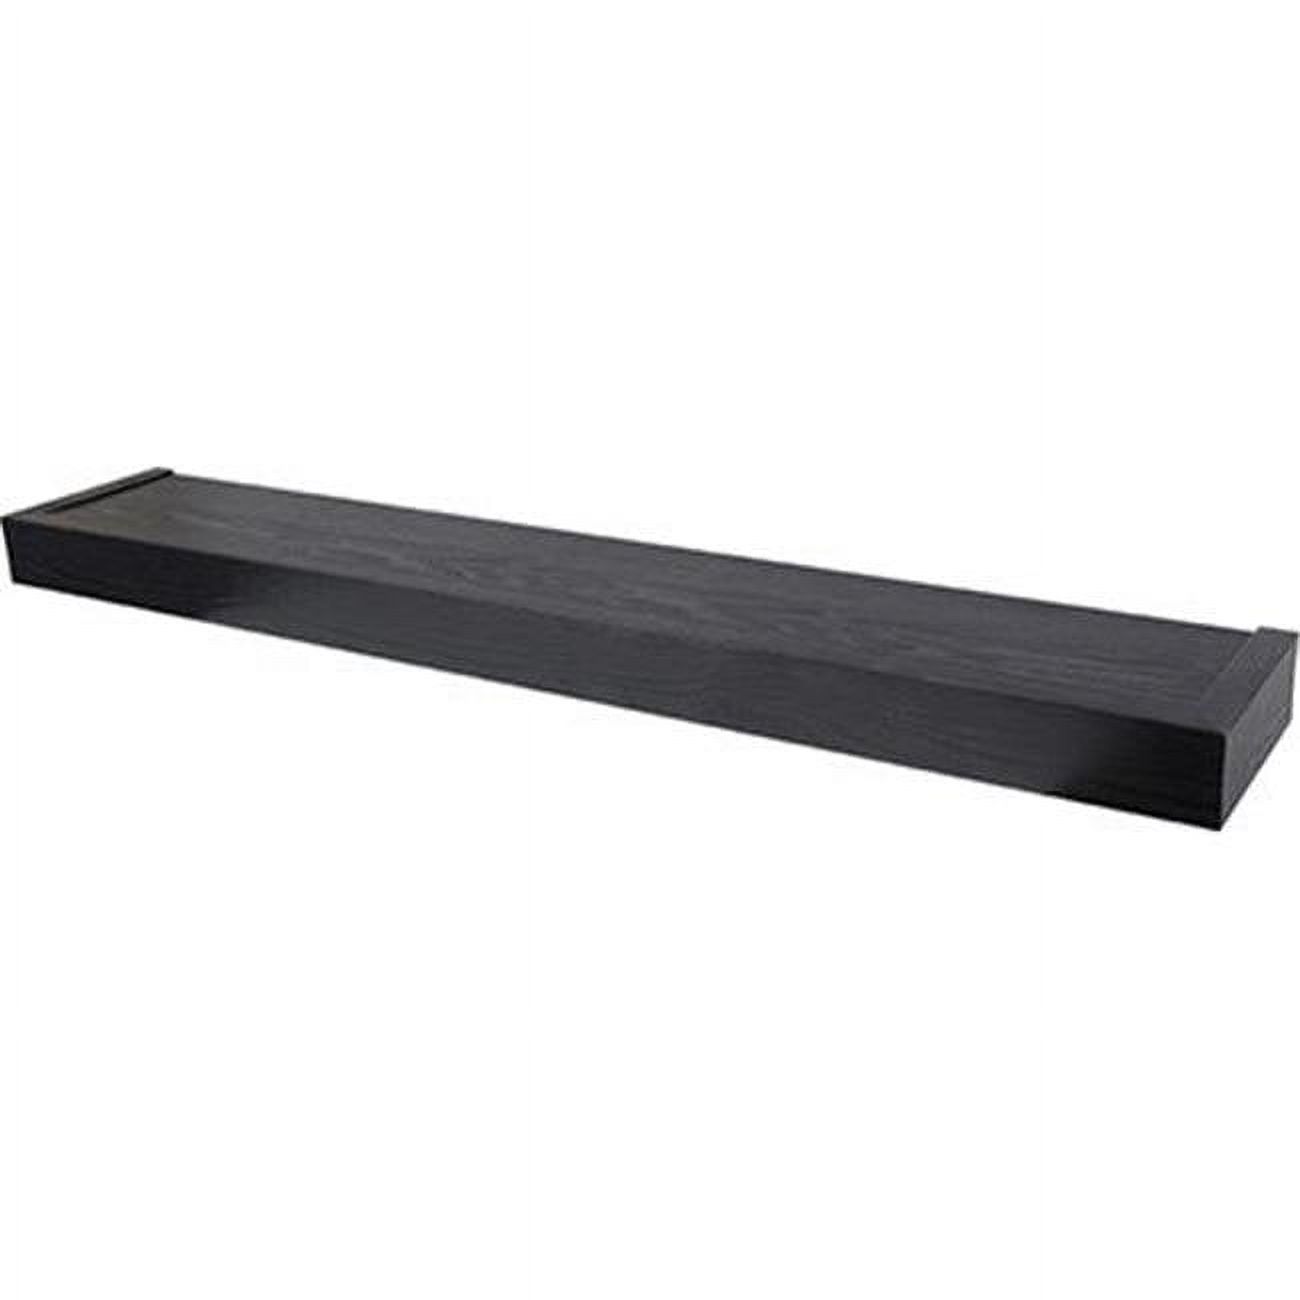 HIGH & MIGHTY Decorative 36" Floating Shelf Holds up to 25lbs, Easy Tool-Free Dry Wall Installation, Flat, eCommerce Packaging, Black - image 1 of 2